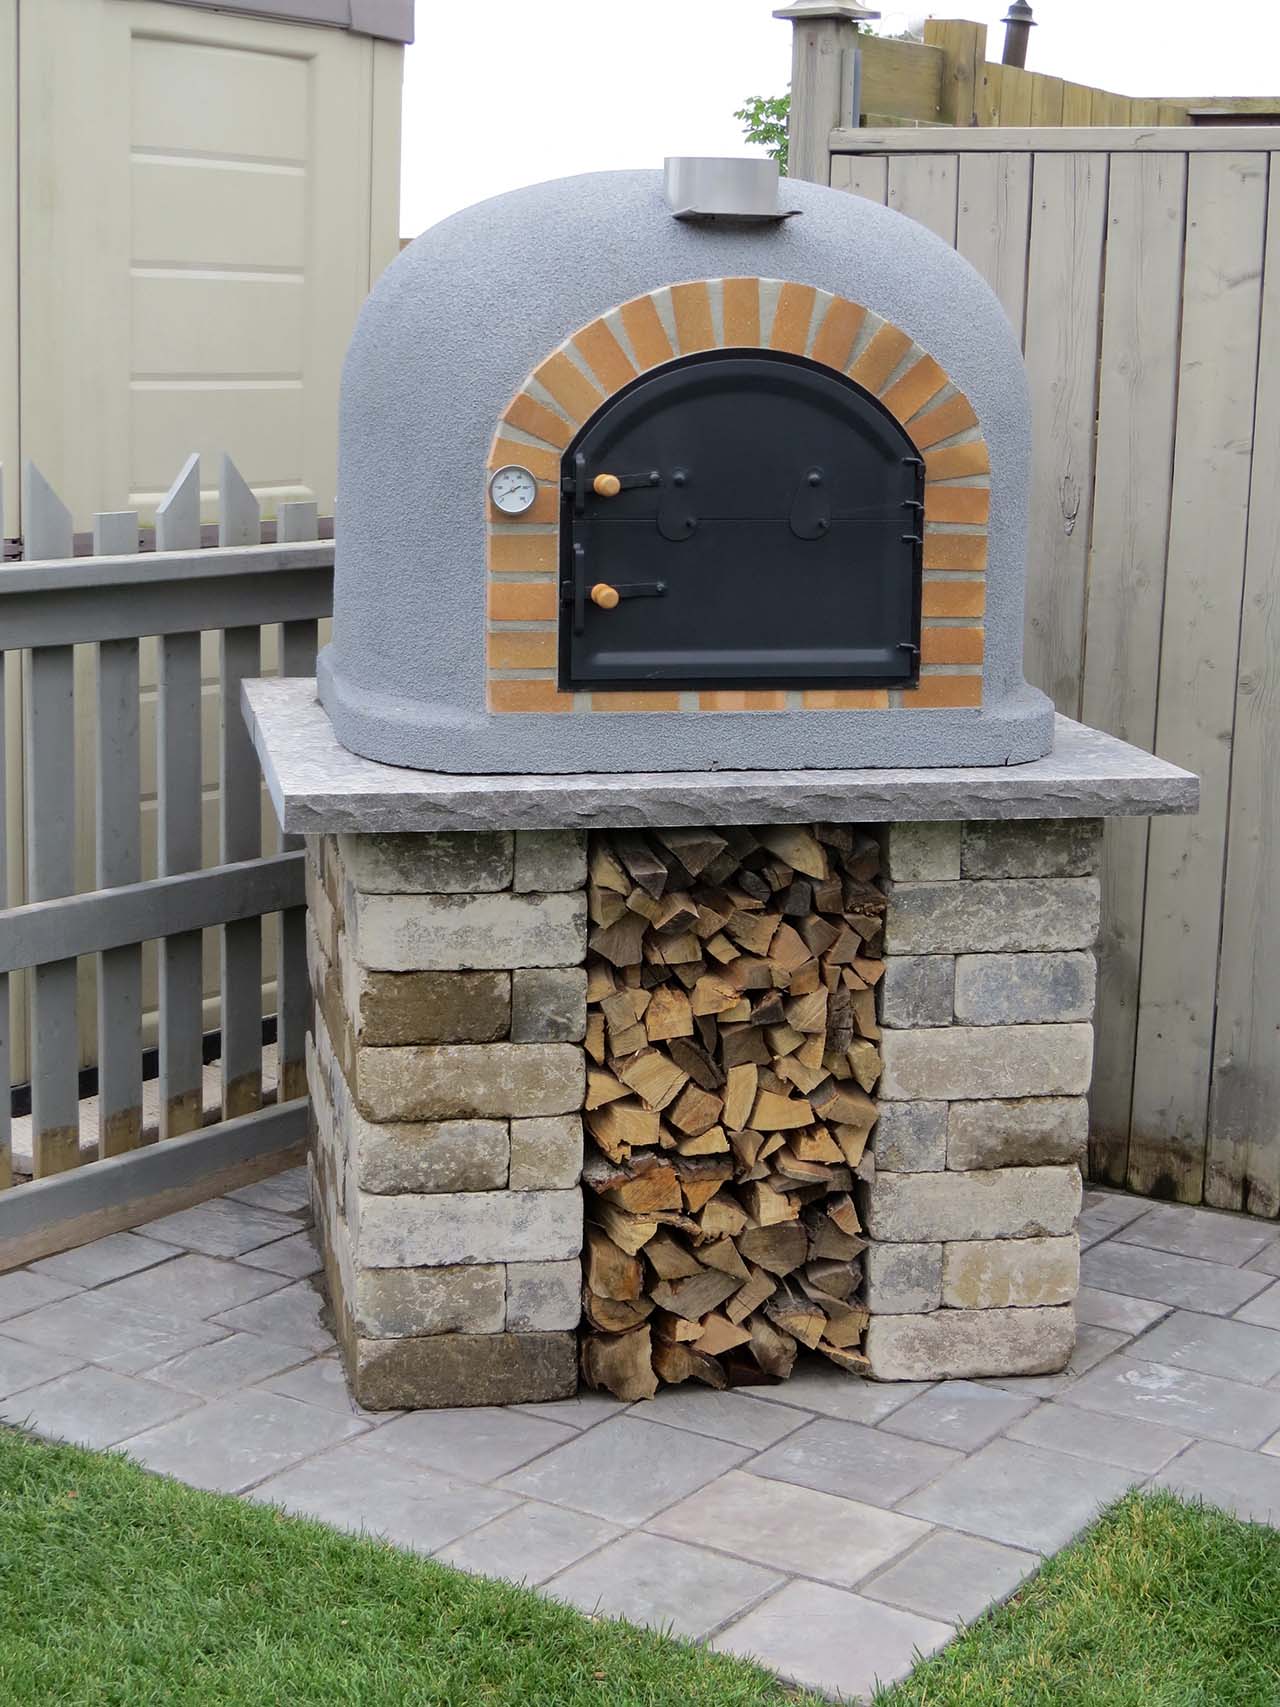 1000+ images about Backyard Pizza Oven on Pinterest